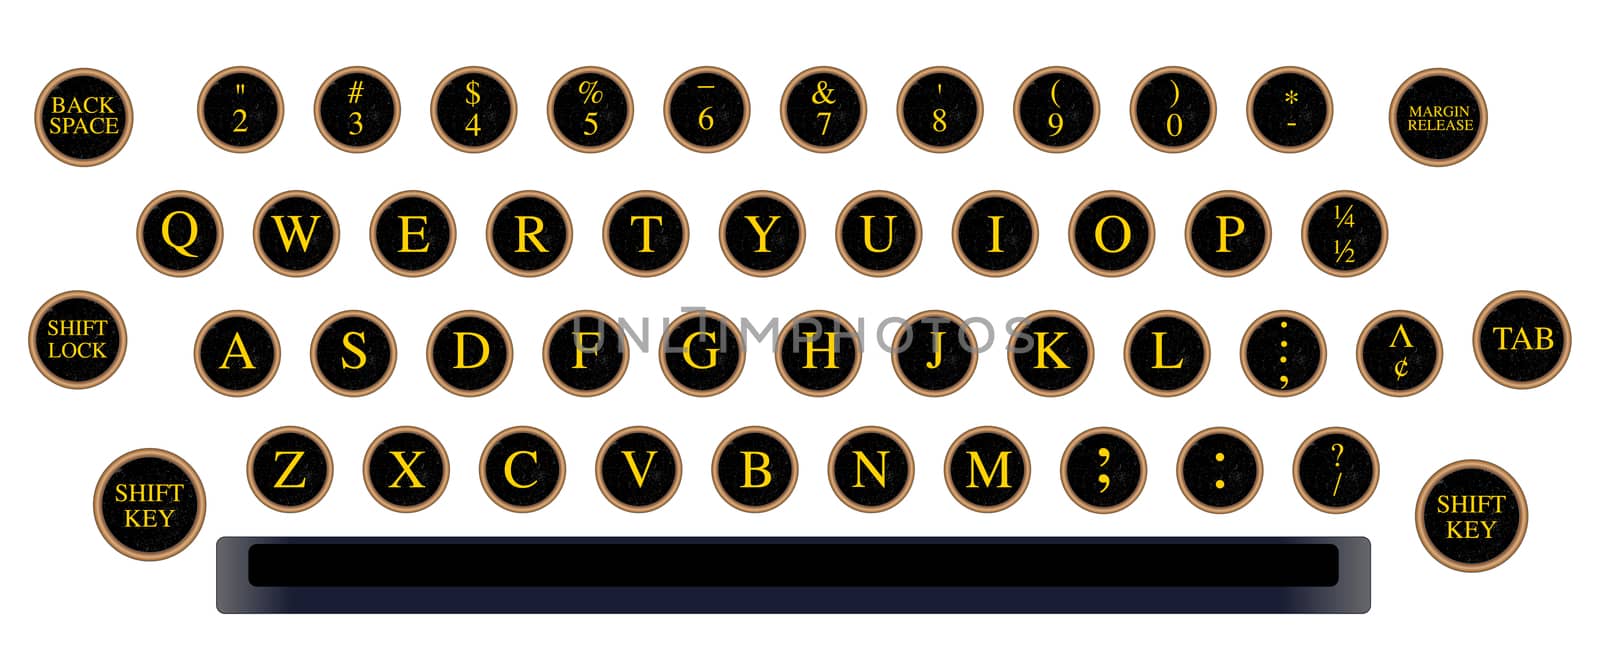 A typical typewriter keyboard key layout over a white background